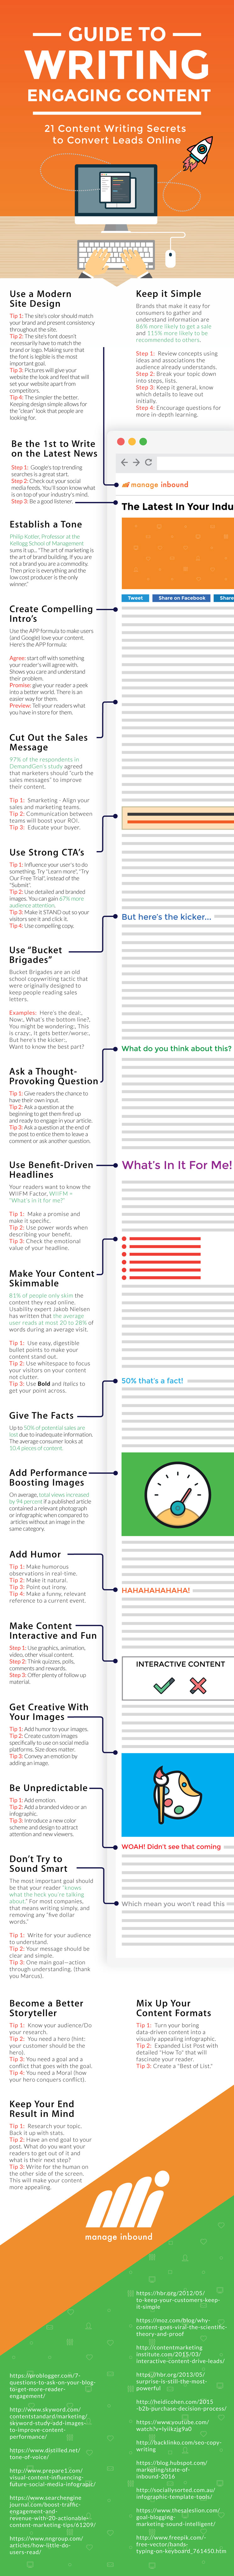 Infographic: How to Create More Engaging Blog Content